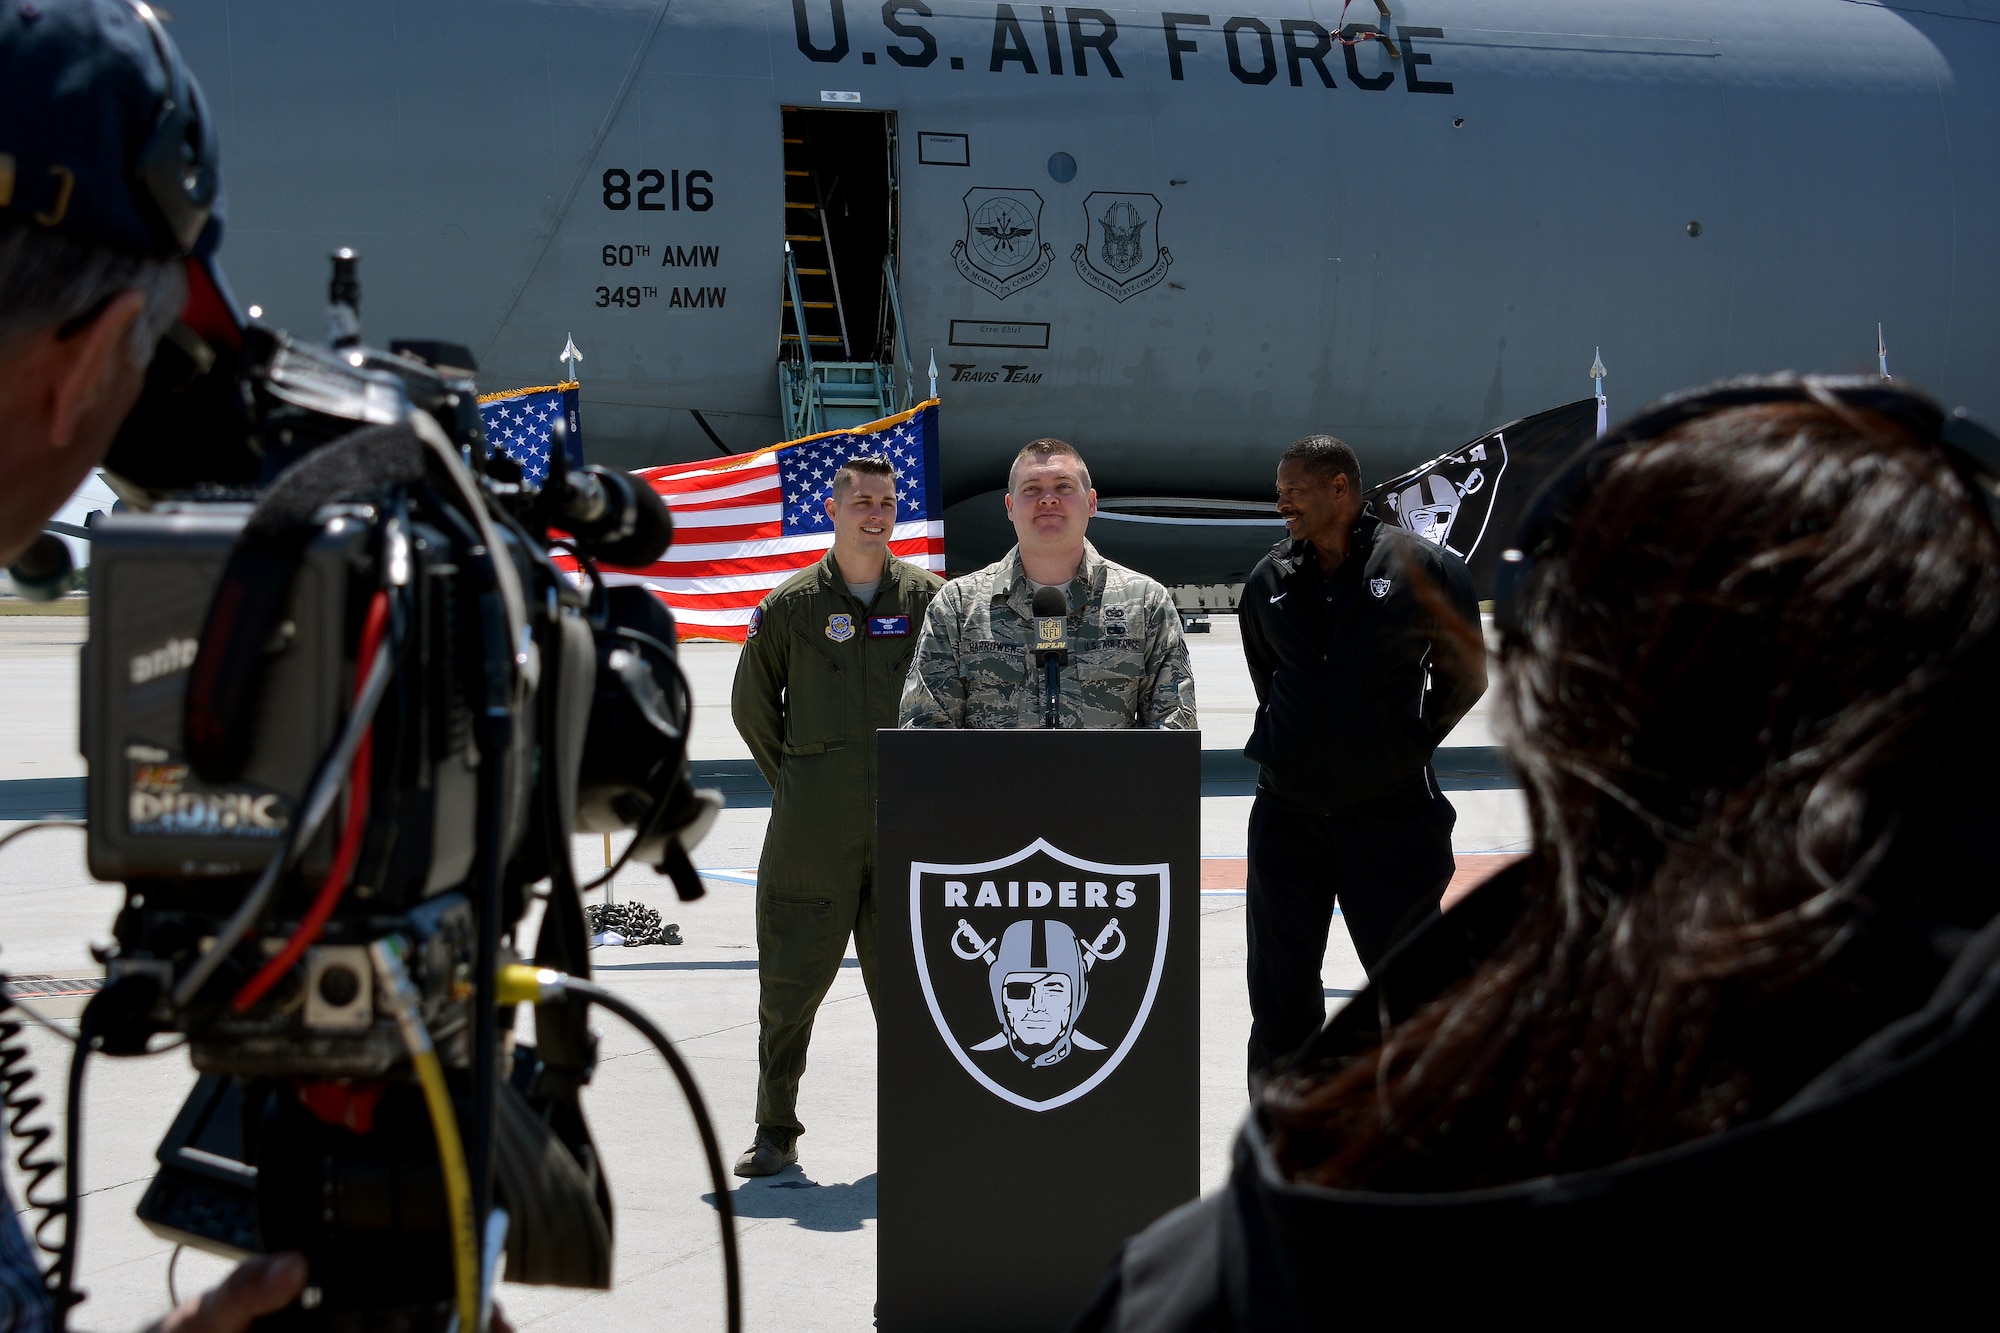 Tech. Sgt. Patrick Harrower, 60th Air Mobility Wing public affairs, prepares to announce a player selection for the Oakland Raiders May 2, 2015, during Day 3 of the NFL Draft, at Travis Air Force Base, California. (U.S Air Force photo by Senior Airman Charles Rivezzo)